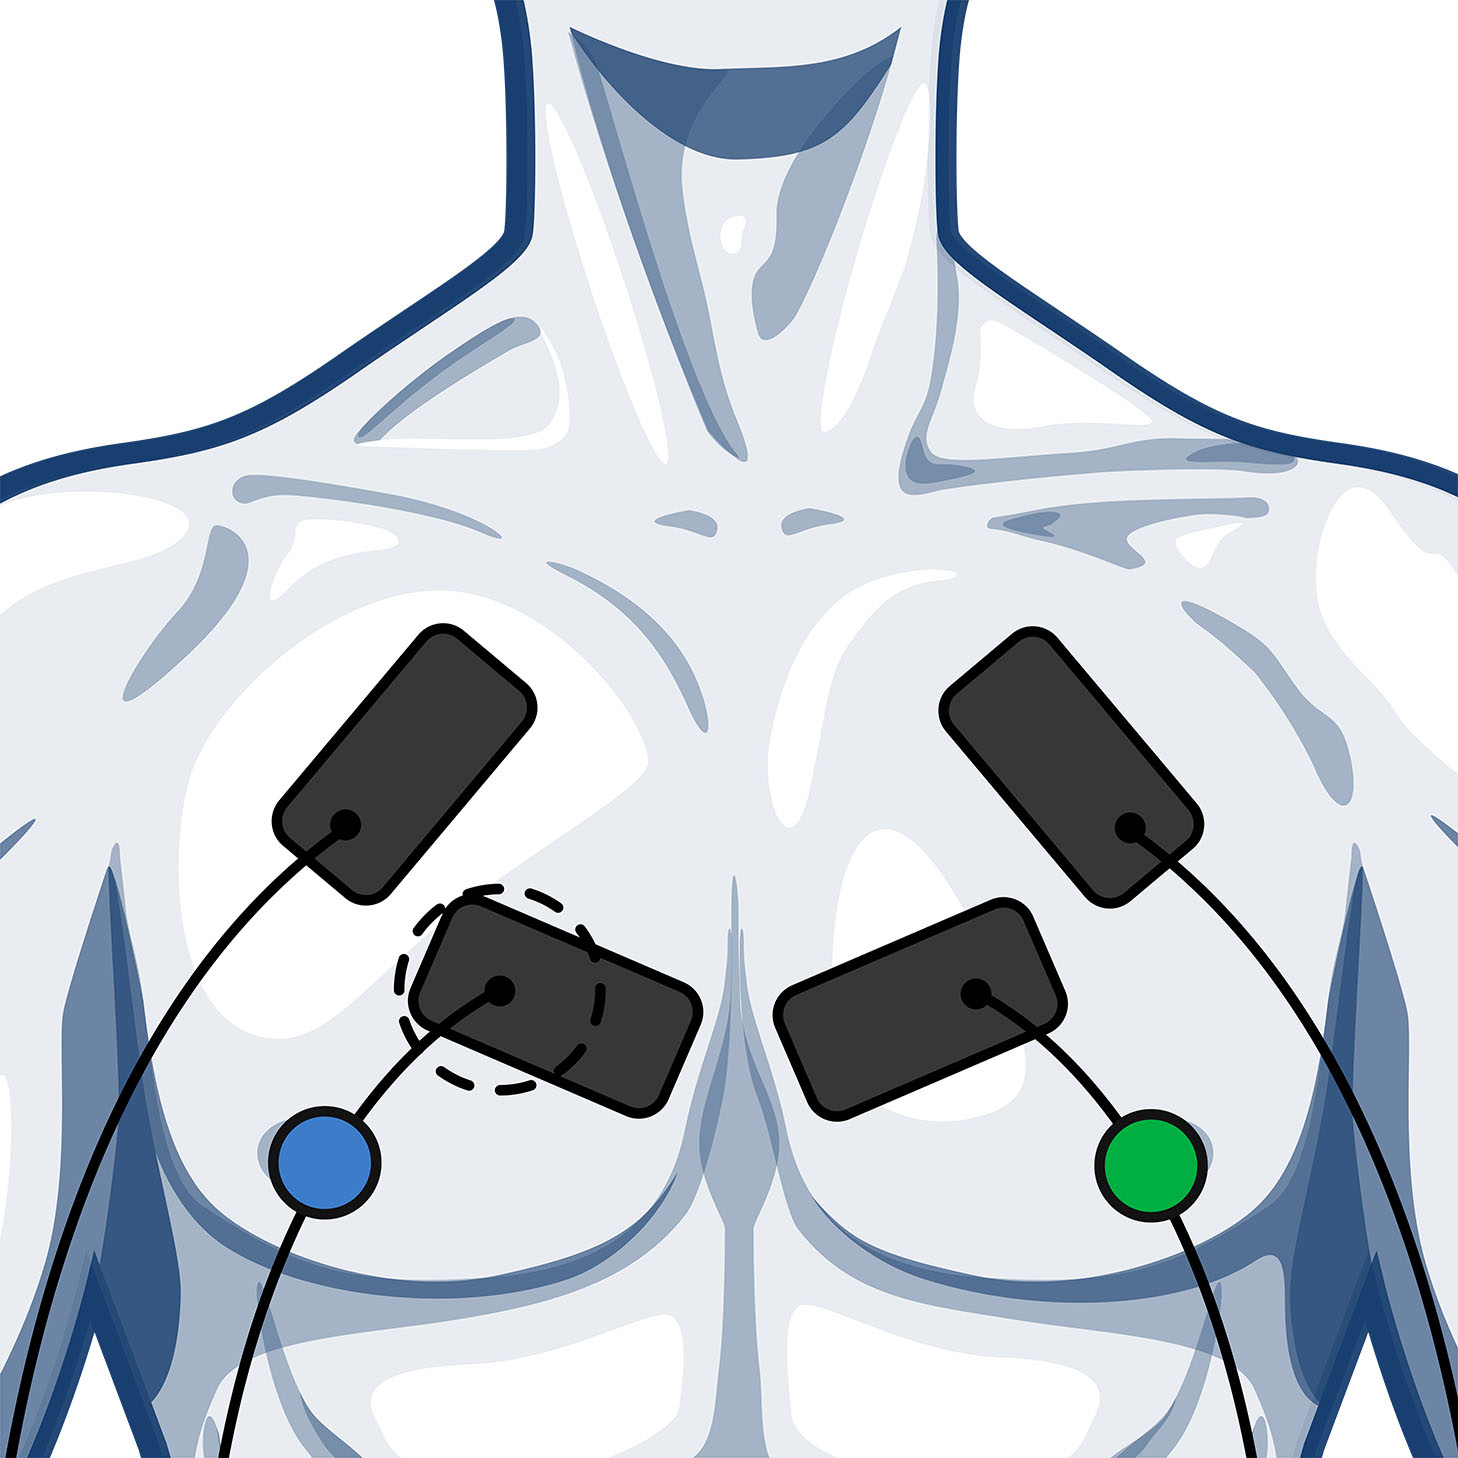 Compex International - Compex electrode placement